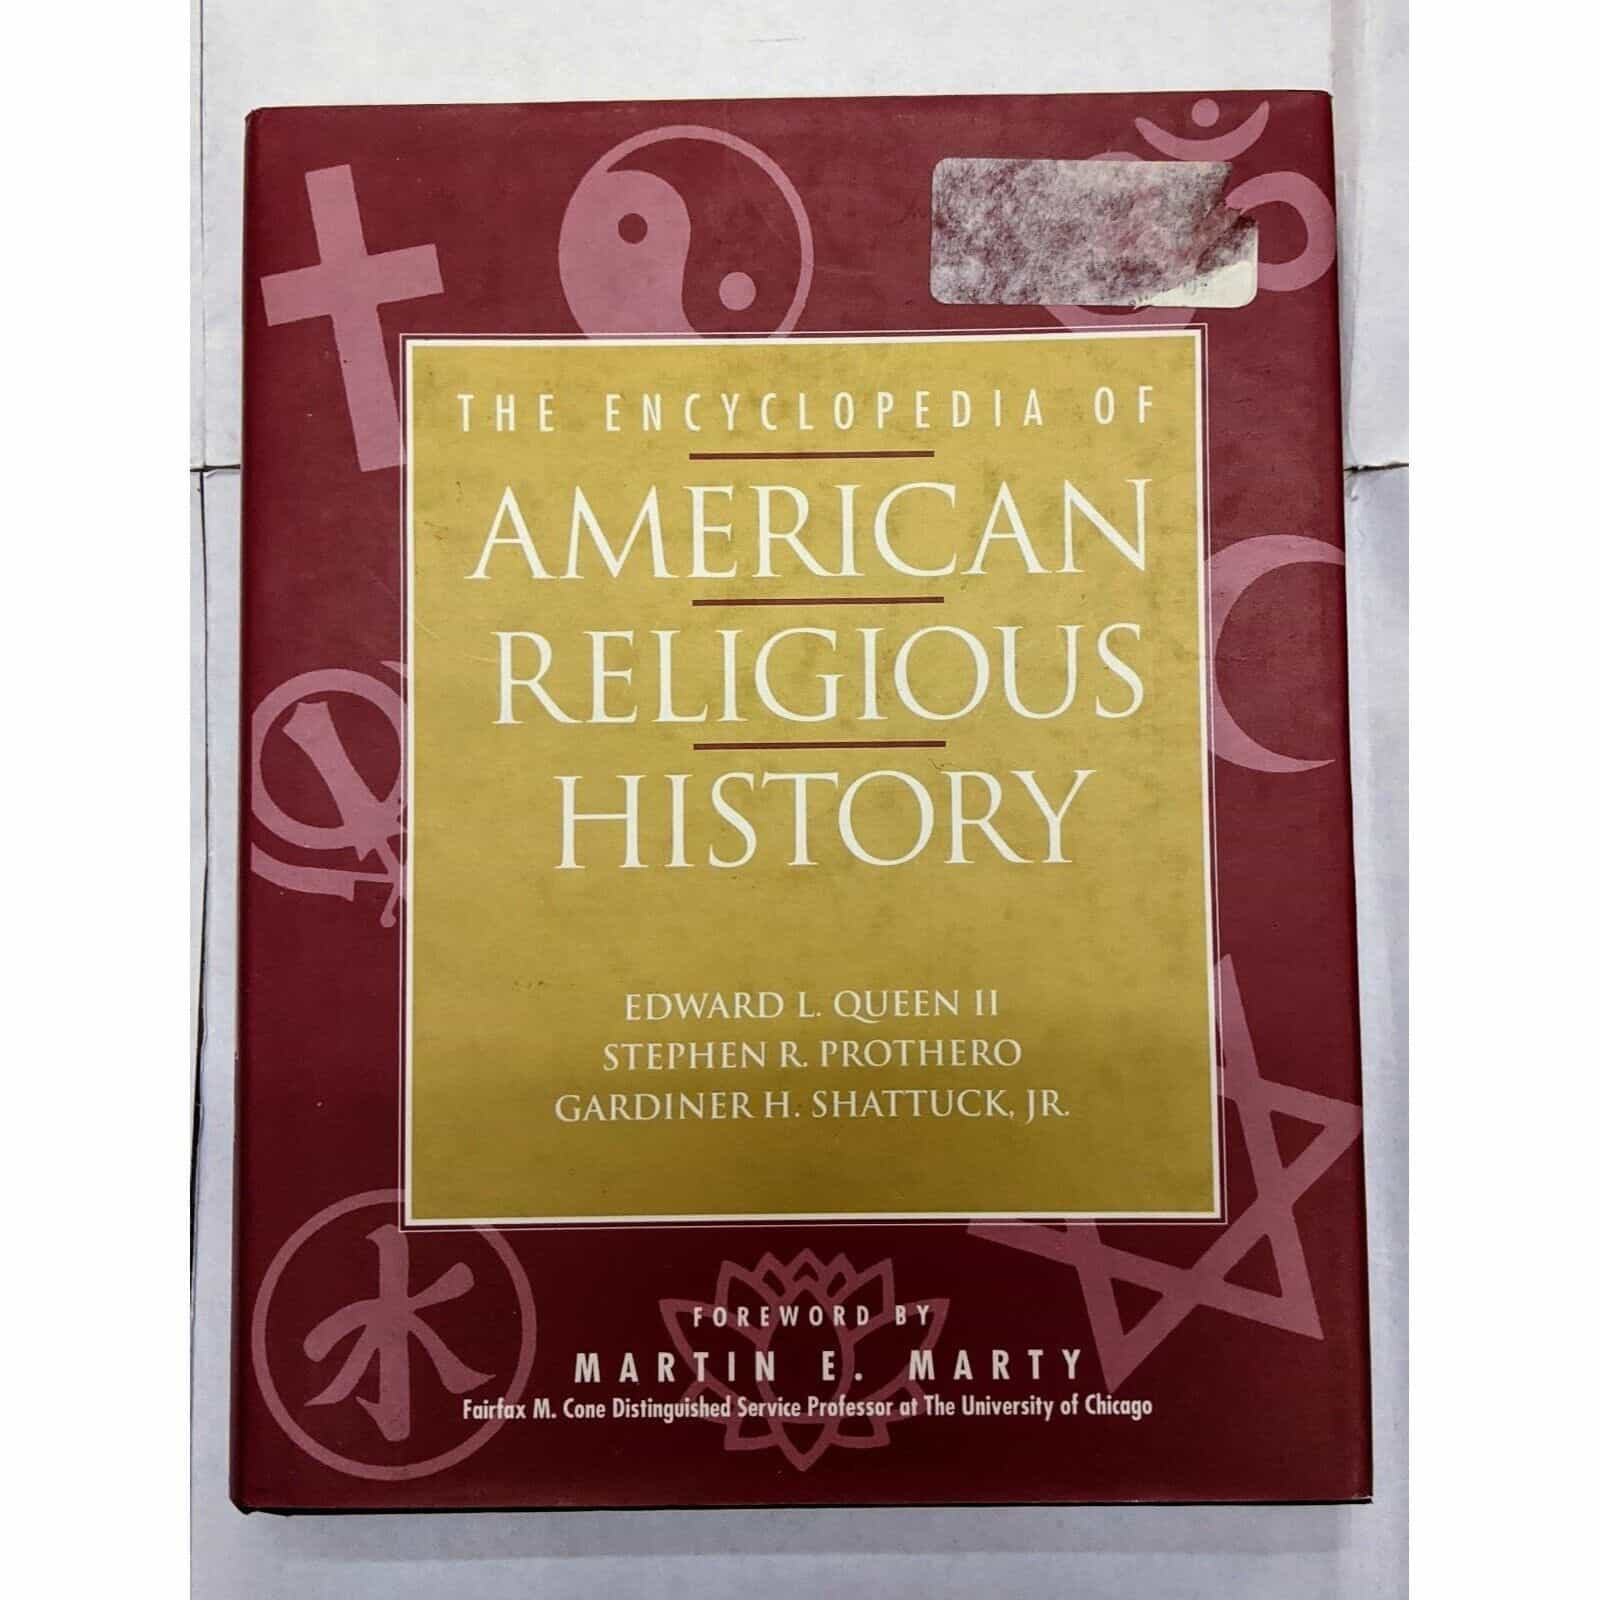 The Encyclopedia of American Religious History by Edward L. Queen II Book